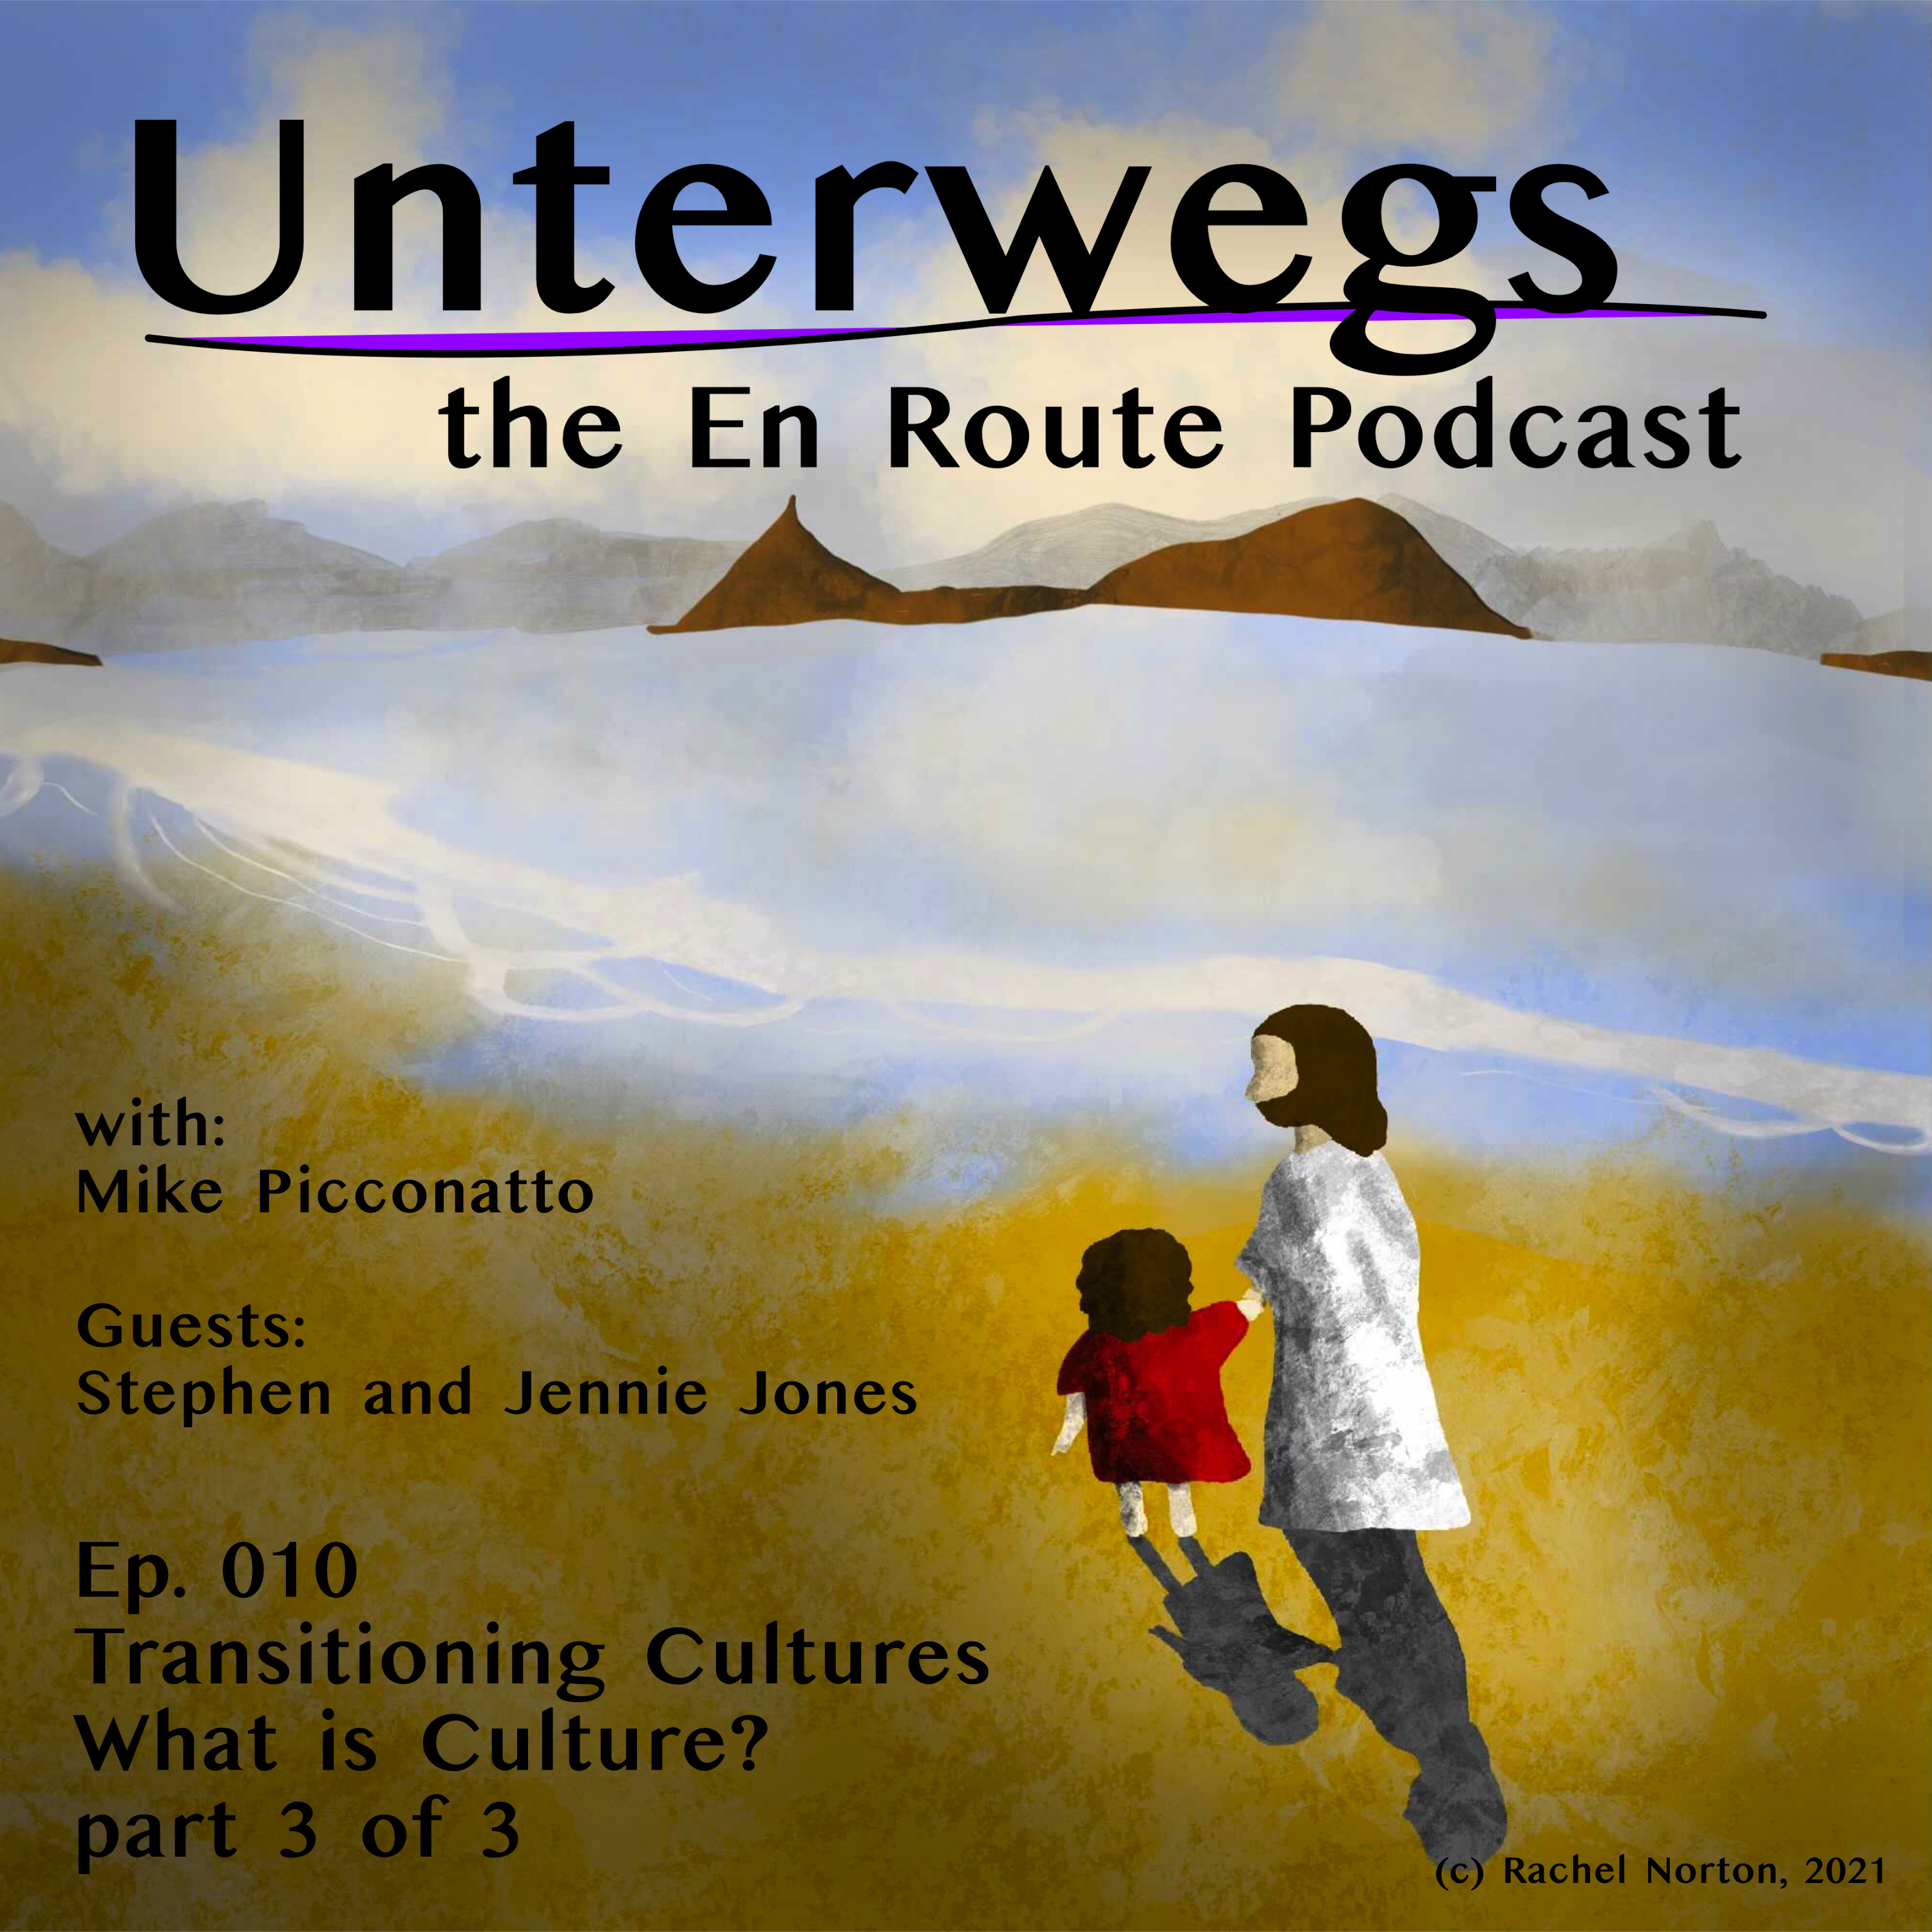 Episode 010 - What is Culture? - part 3 of 3